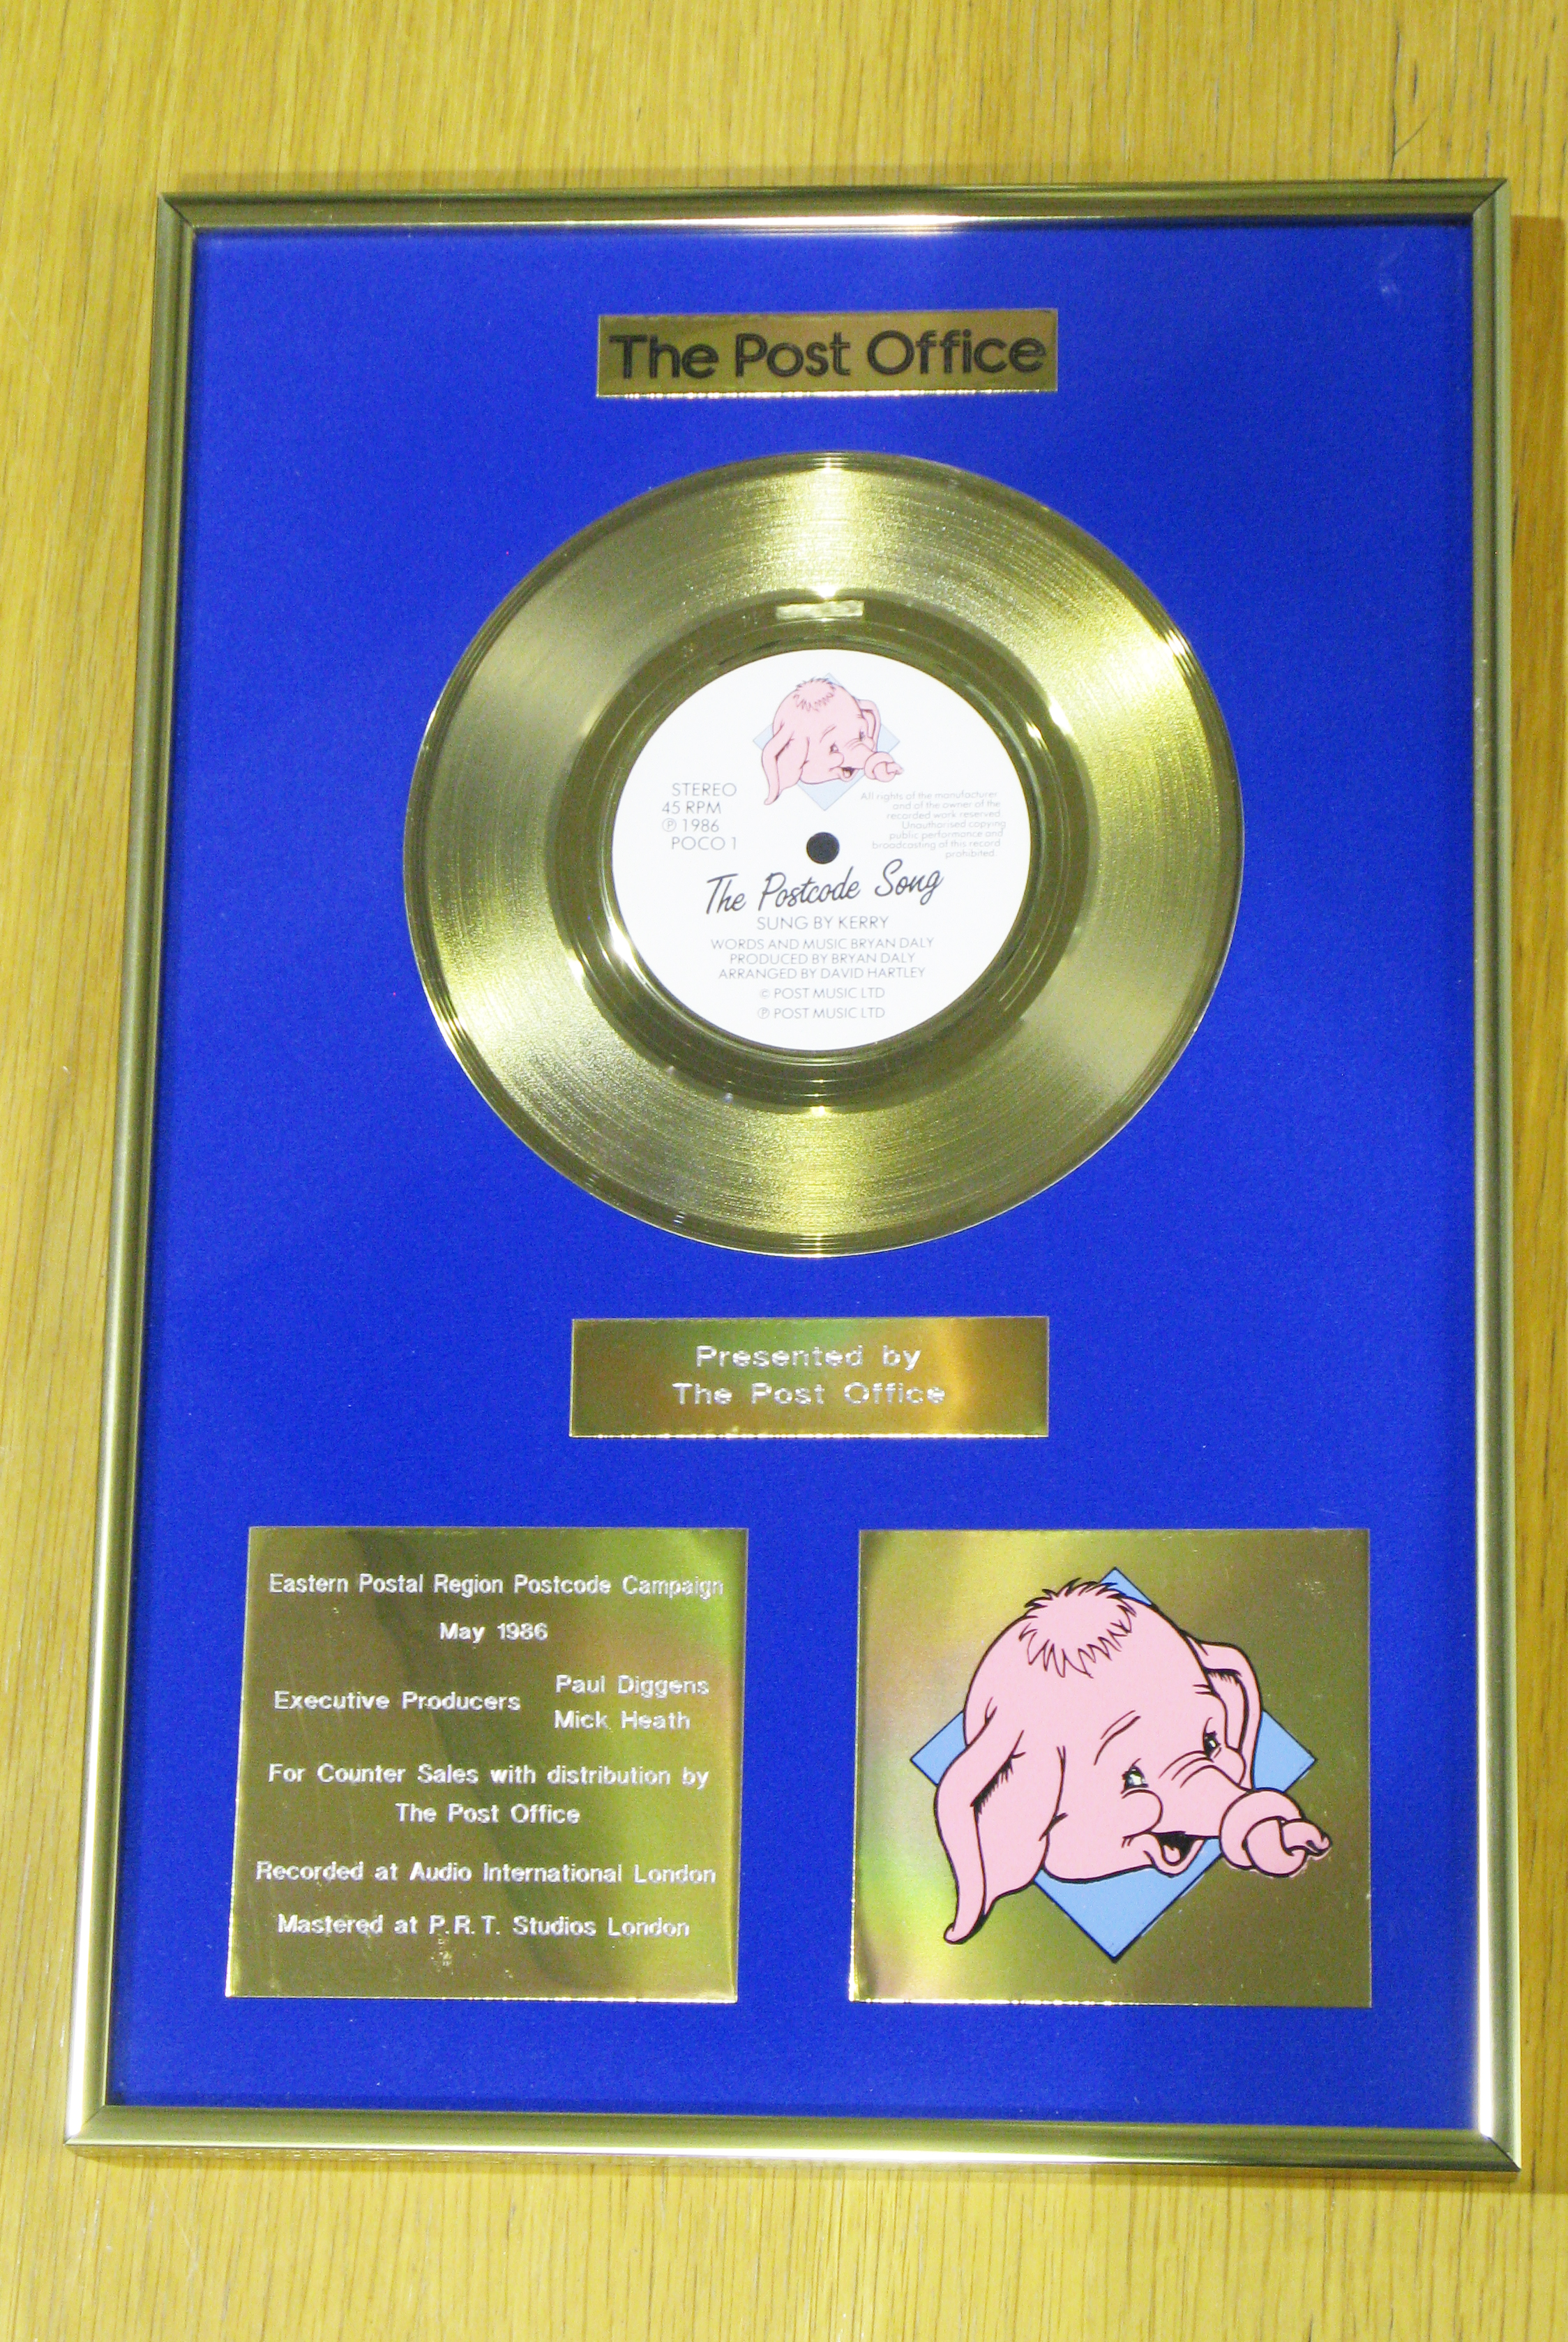 Gold Disc awarded for the ‘Postcode Song’ (TPM E15077)